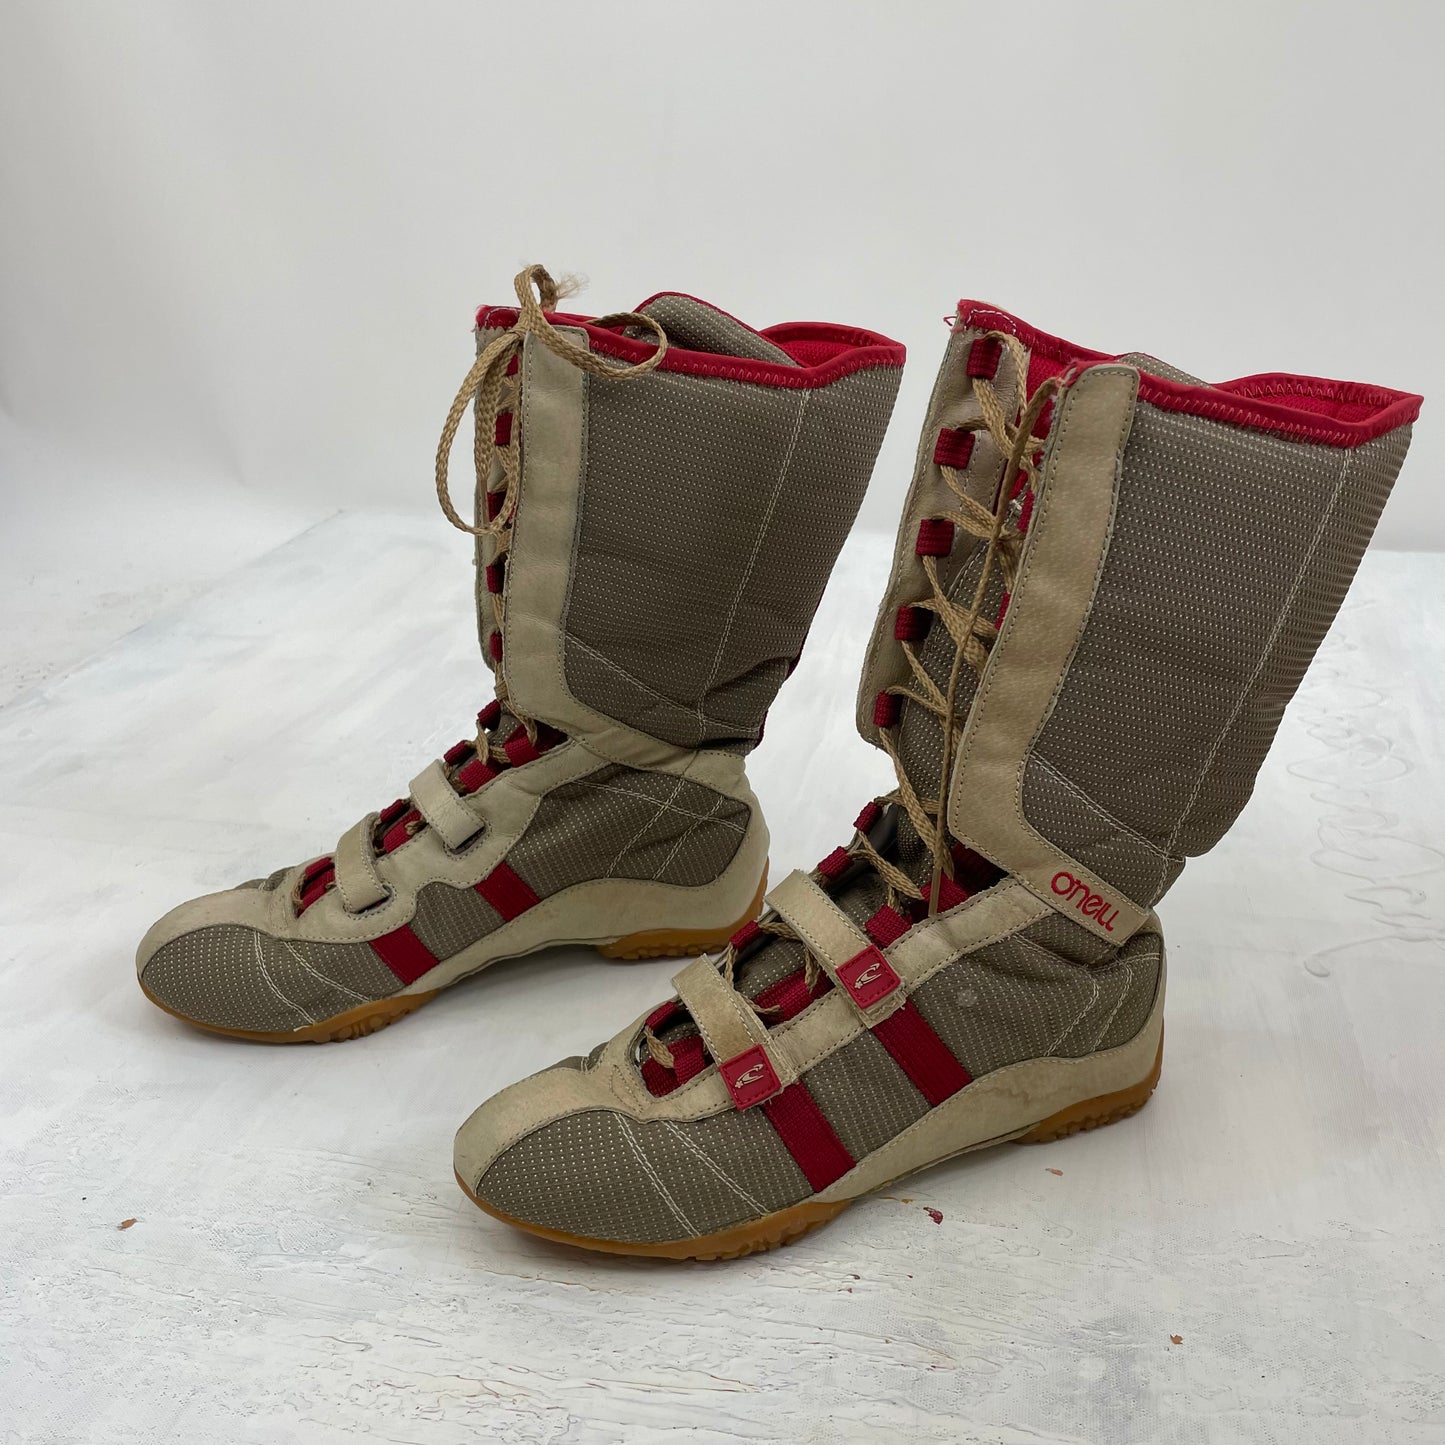 ⭐️ ELEVATED SPORTSWEAR DROP | size 5 grey/ red o’neill boxing boots